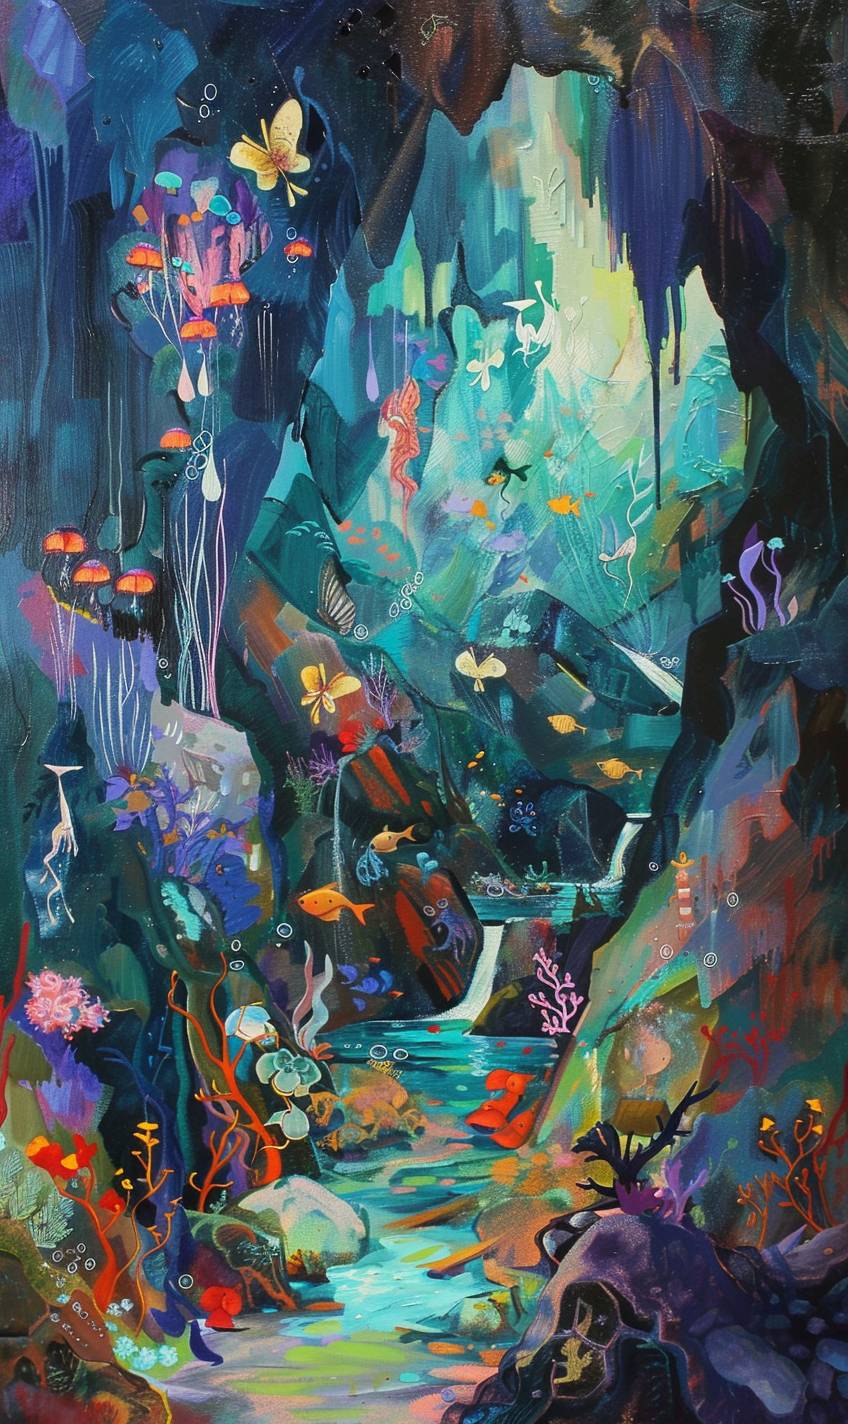 In the style of Isaac Maimon, an underwater cavern with magical merfolk